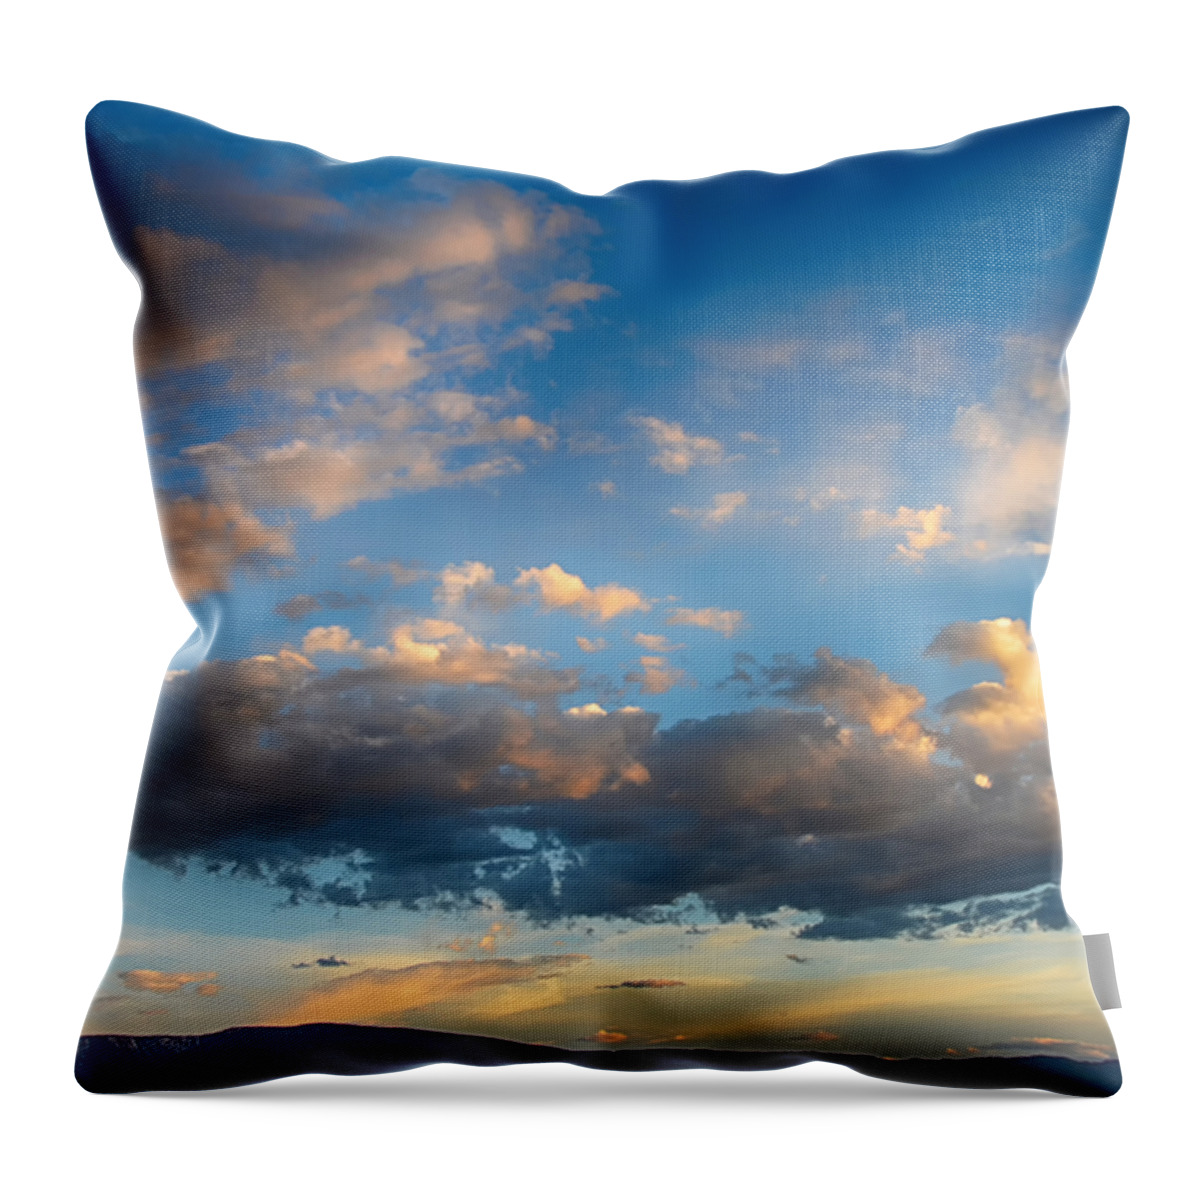 Colorado Sunset Throw Pillow featuring the photograph Breathtaking Colorado Sunset 2 by Angelina Tamez